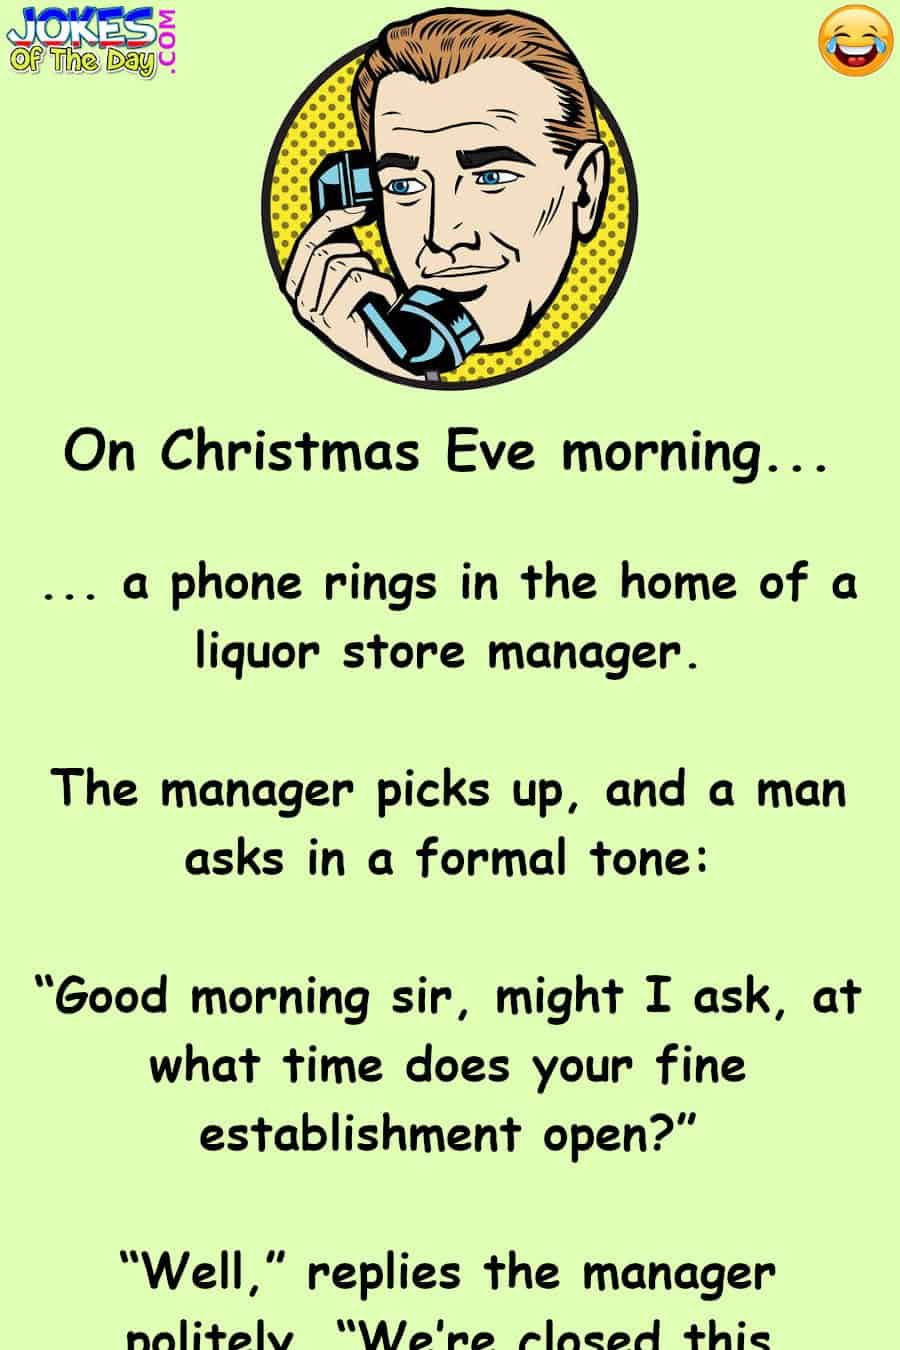 Humor - The Drunk Makes A Phone Call on Christmas Eve  ‣ Jokes Of The Day 